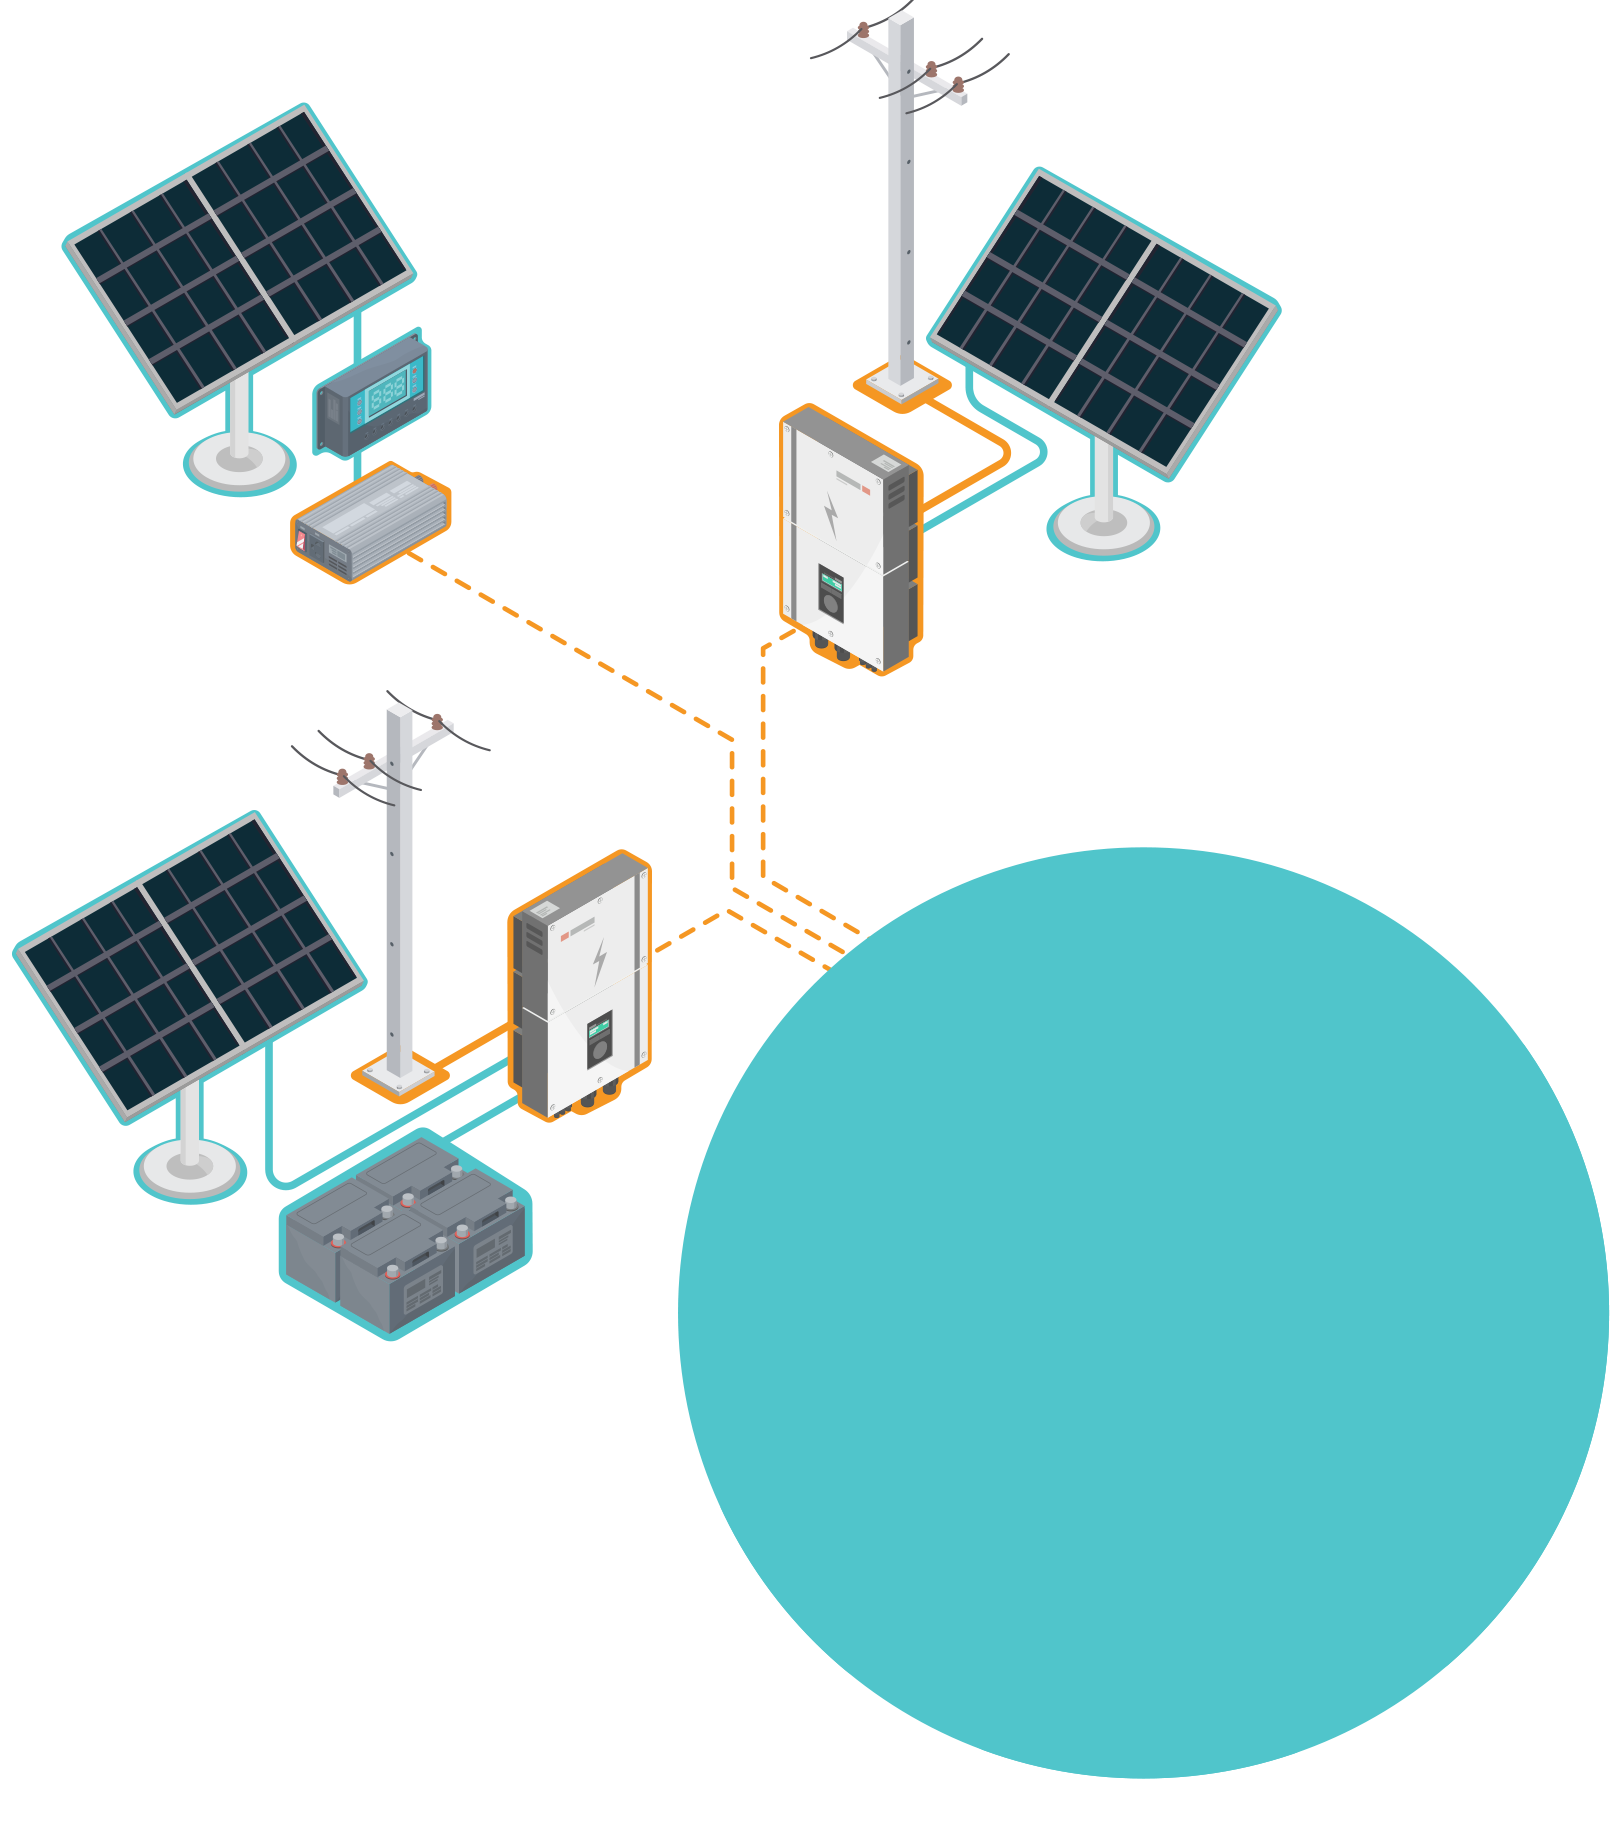 Illustration background showing decentralized energy systems